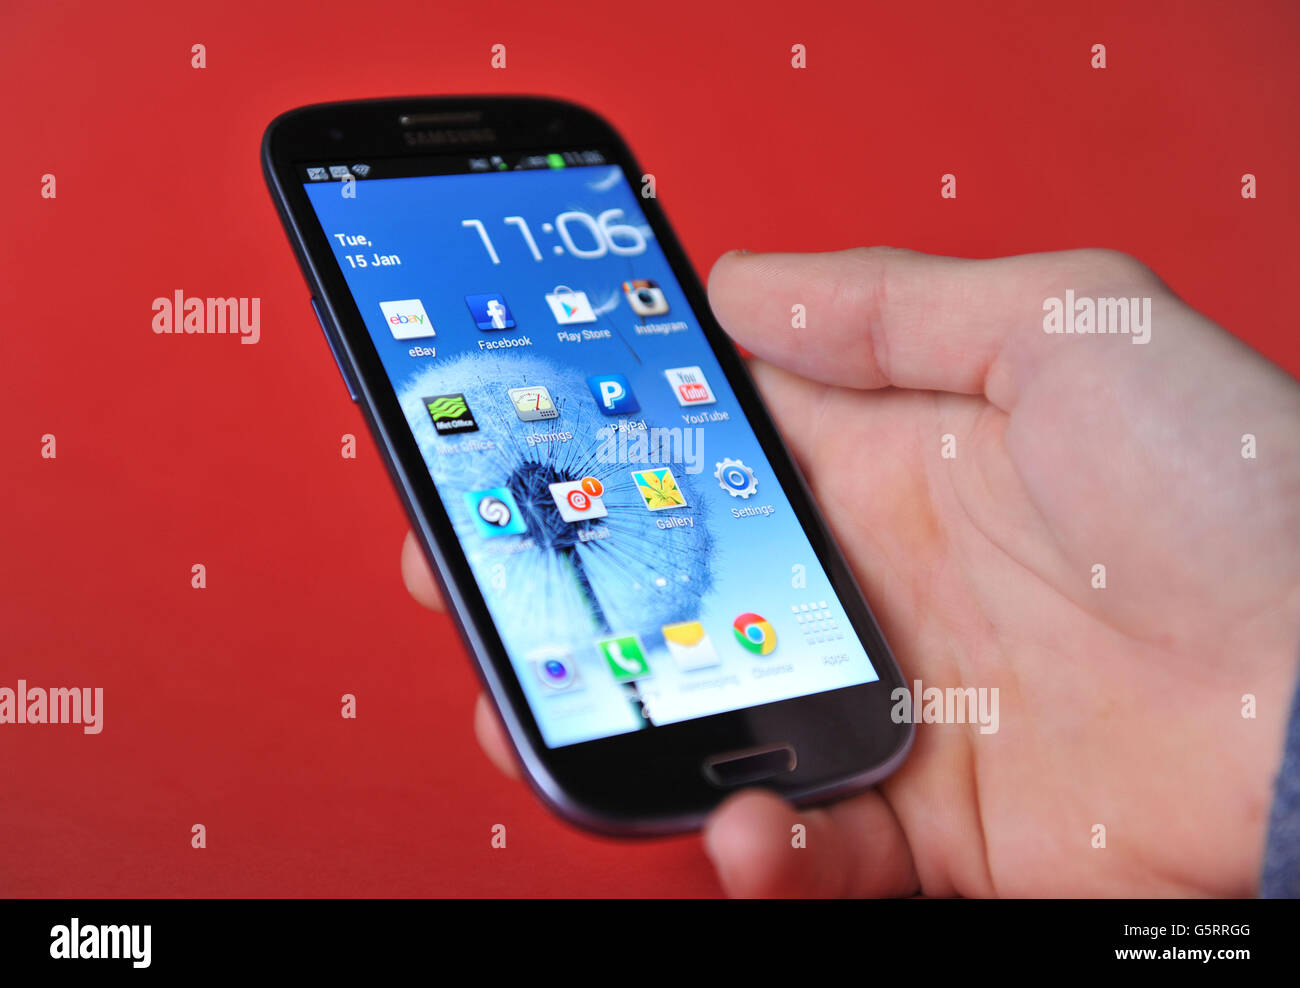 Stock photo of a Samsung Galaxy S3 android phone. Stock Photo